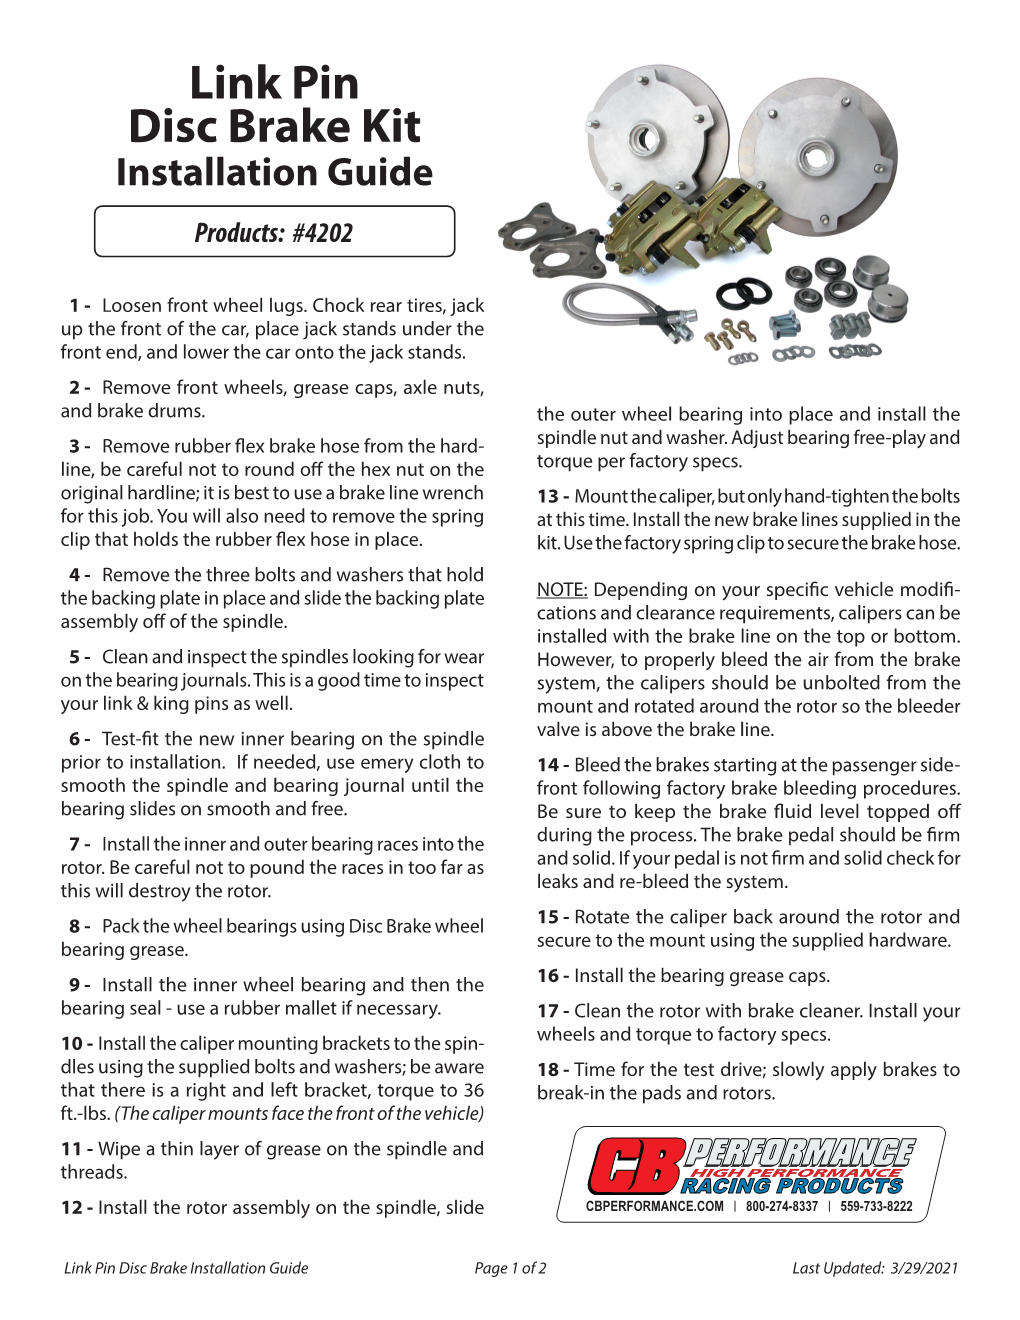 Link Pin Disc Brake Kit Installation Guide Products: #4202